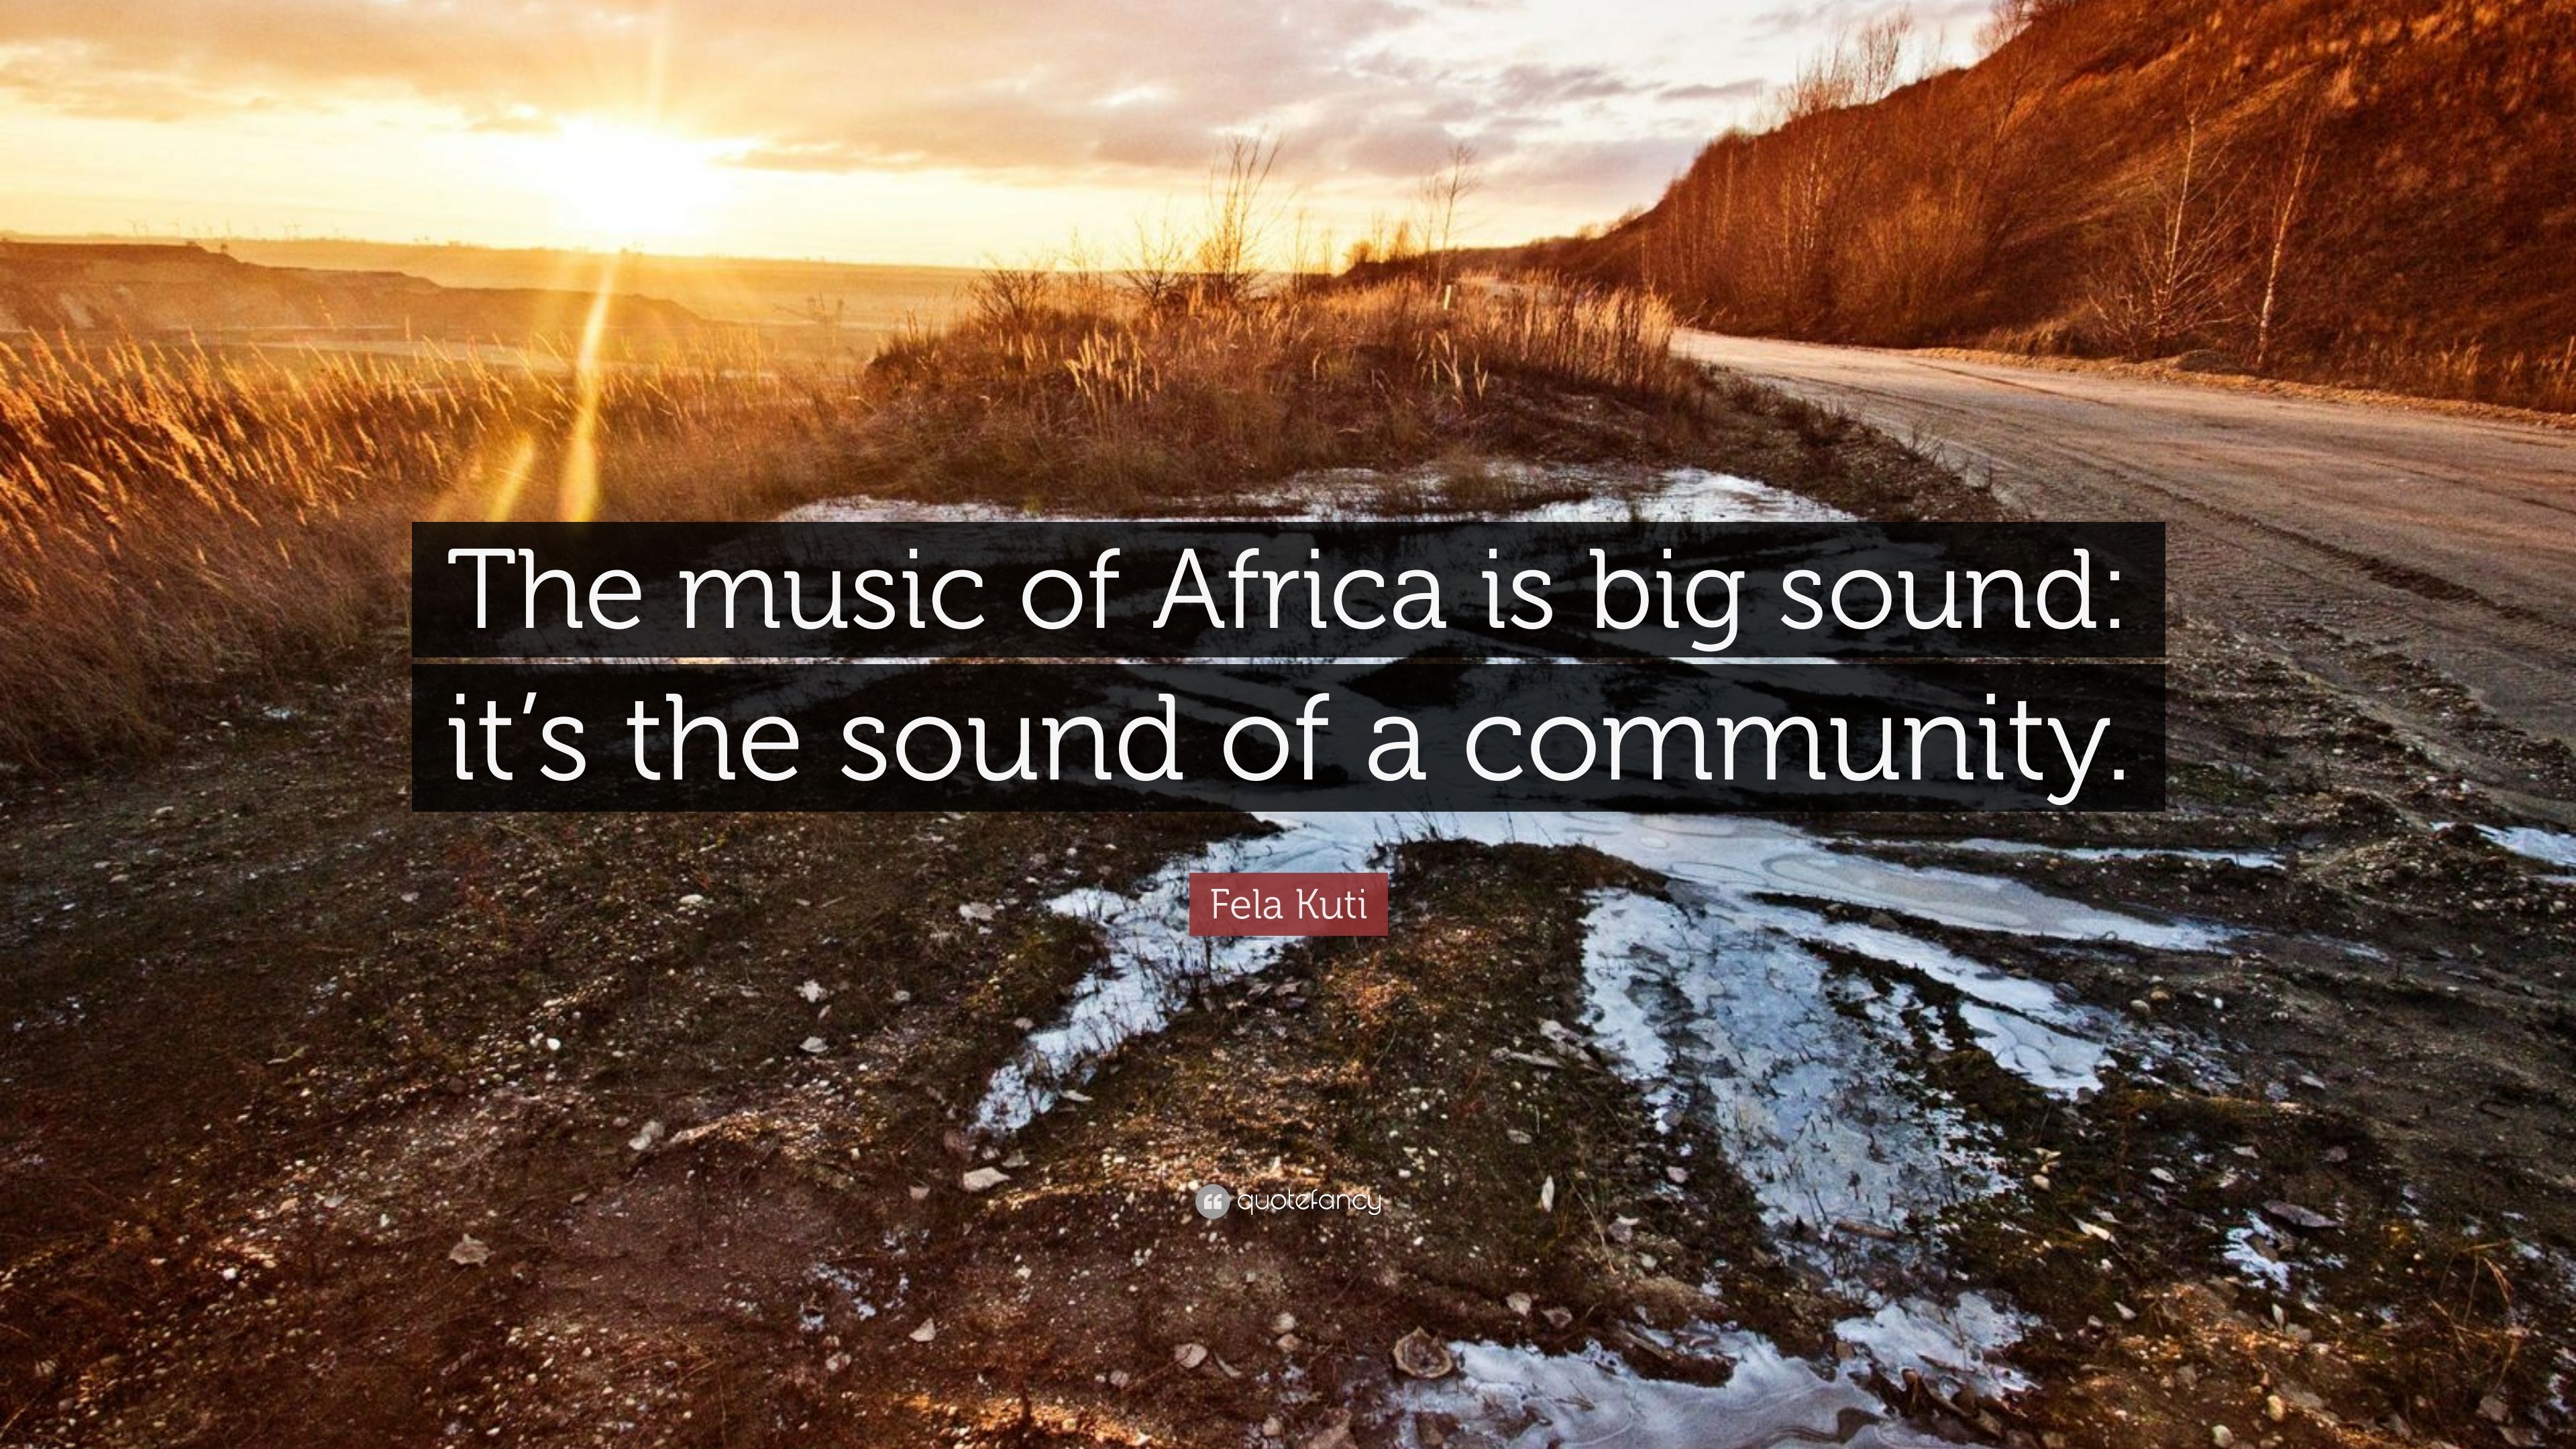 Fela Kuti Quote: “The music of Africa is big sound: it's the sound